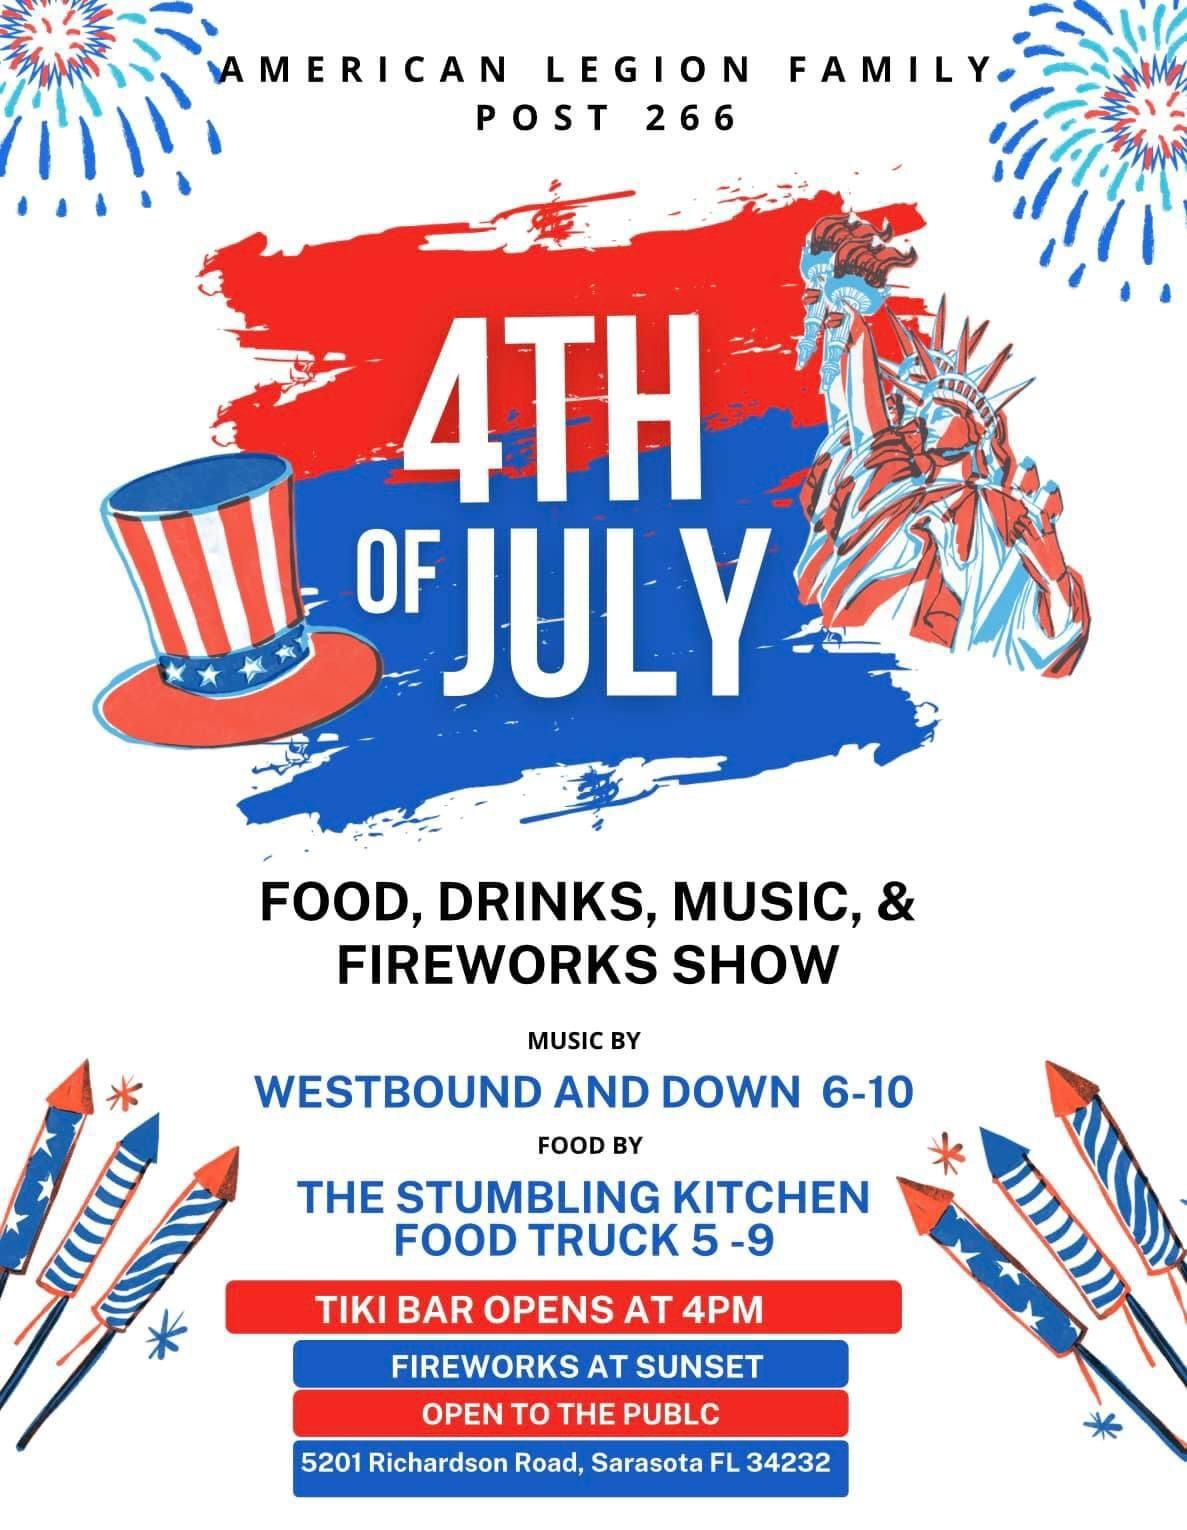 Celebrate 4th of July with Westbound and Down at AL Post 266!!